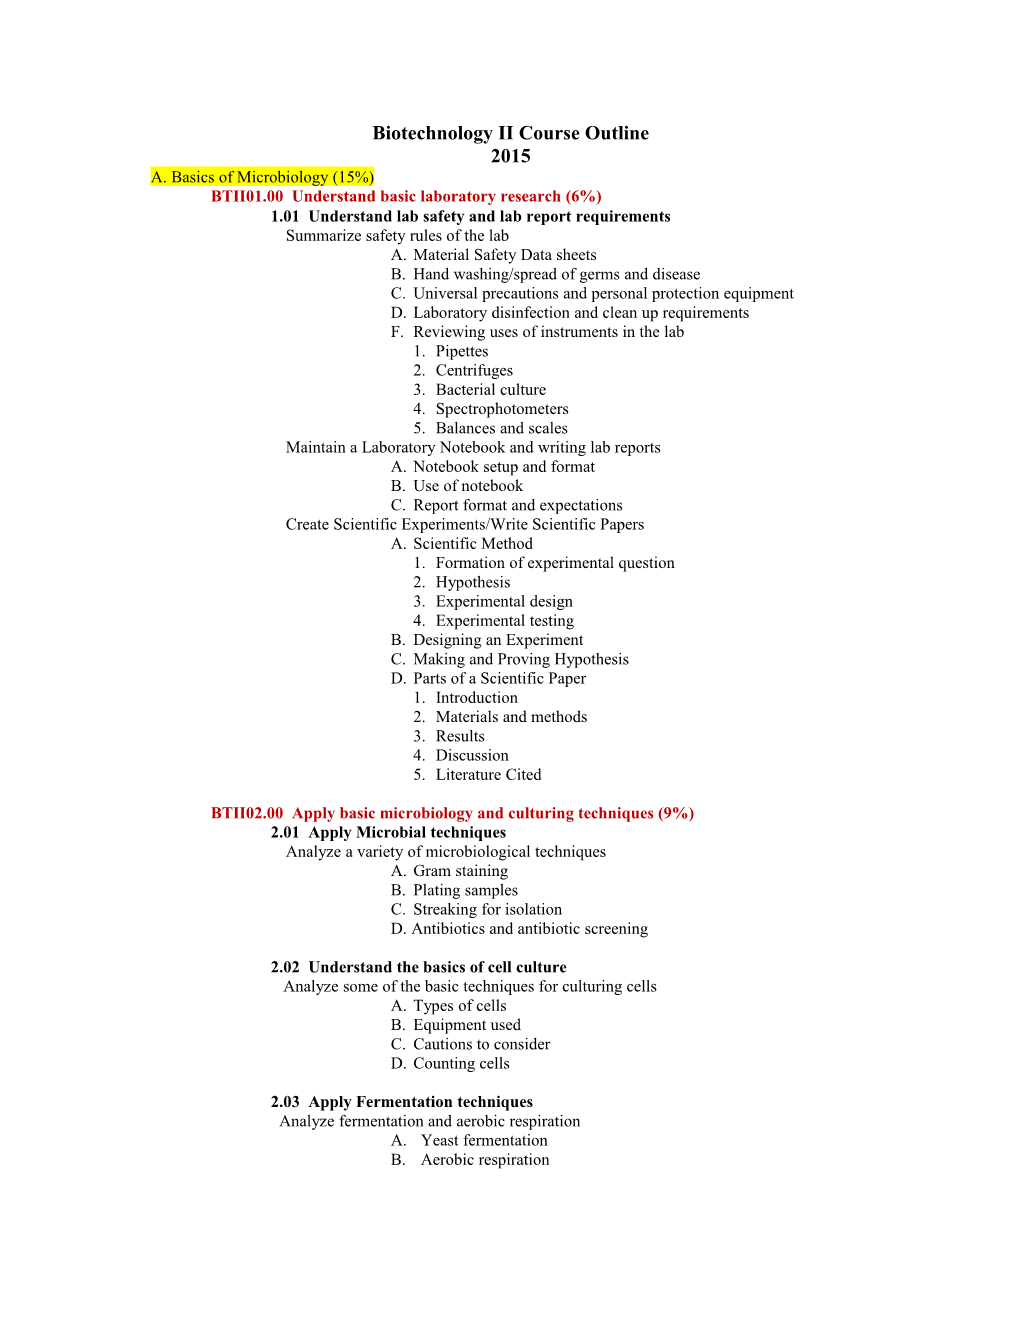 New Biotechnology II Course Outline